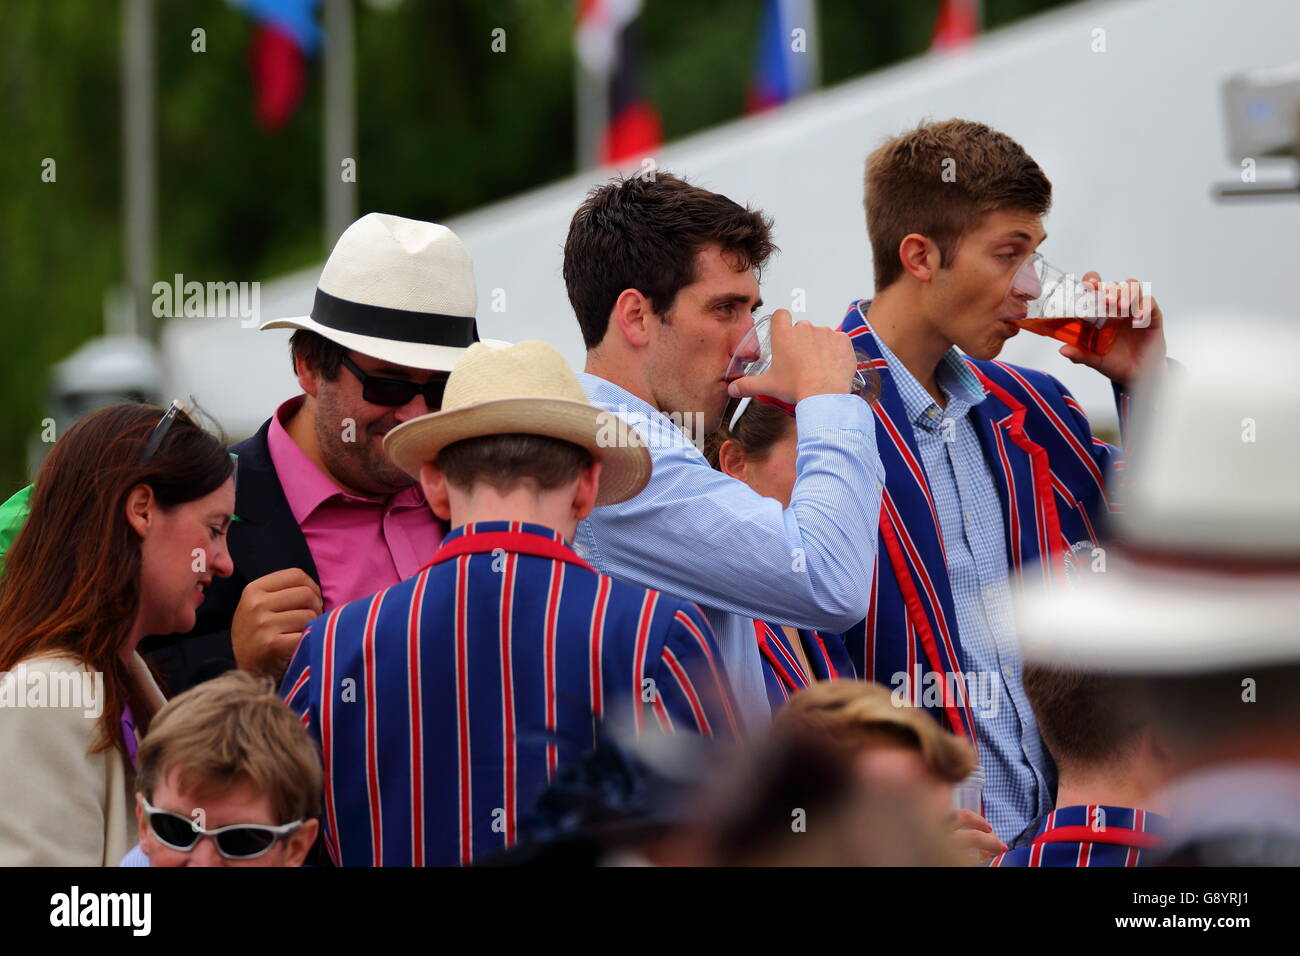 Rowers from all over the world came to the annual Henley Royal Regatta 2016, while revellers enjoy a drink. Stock Photo